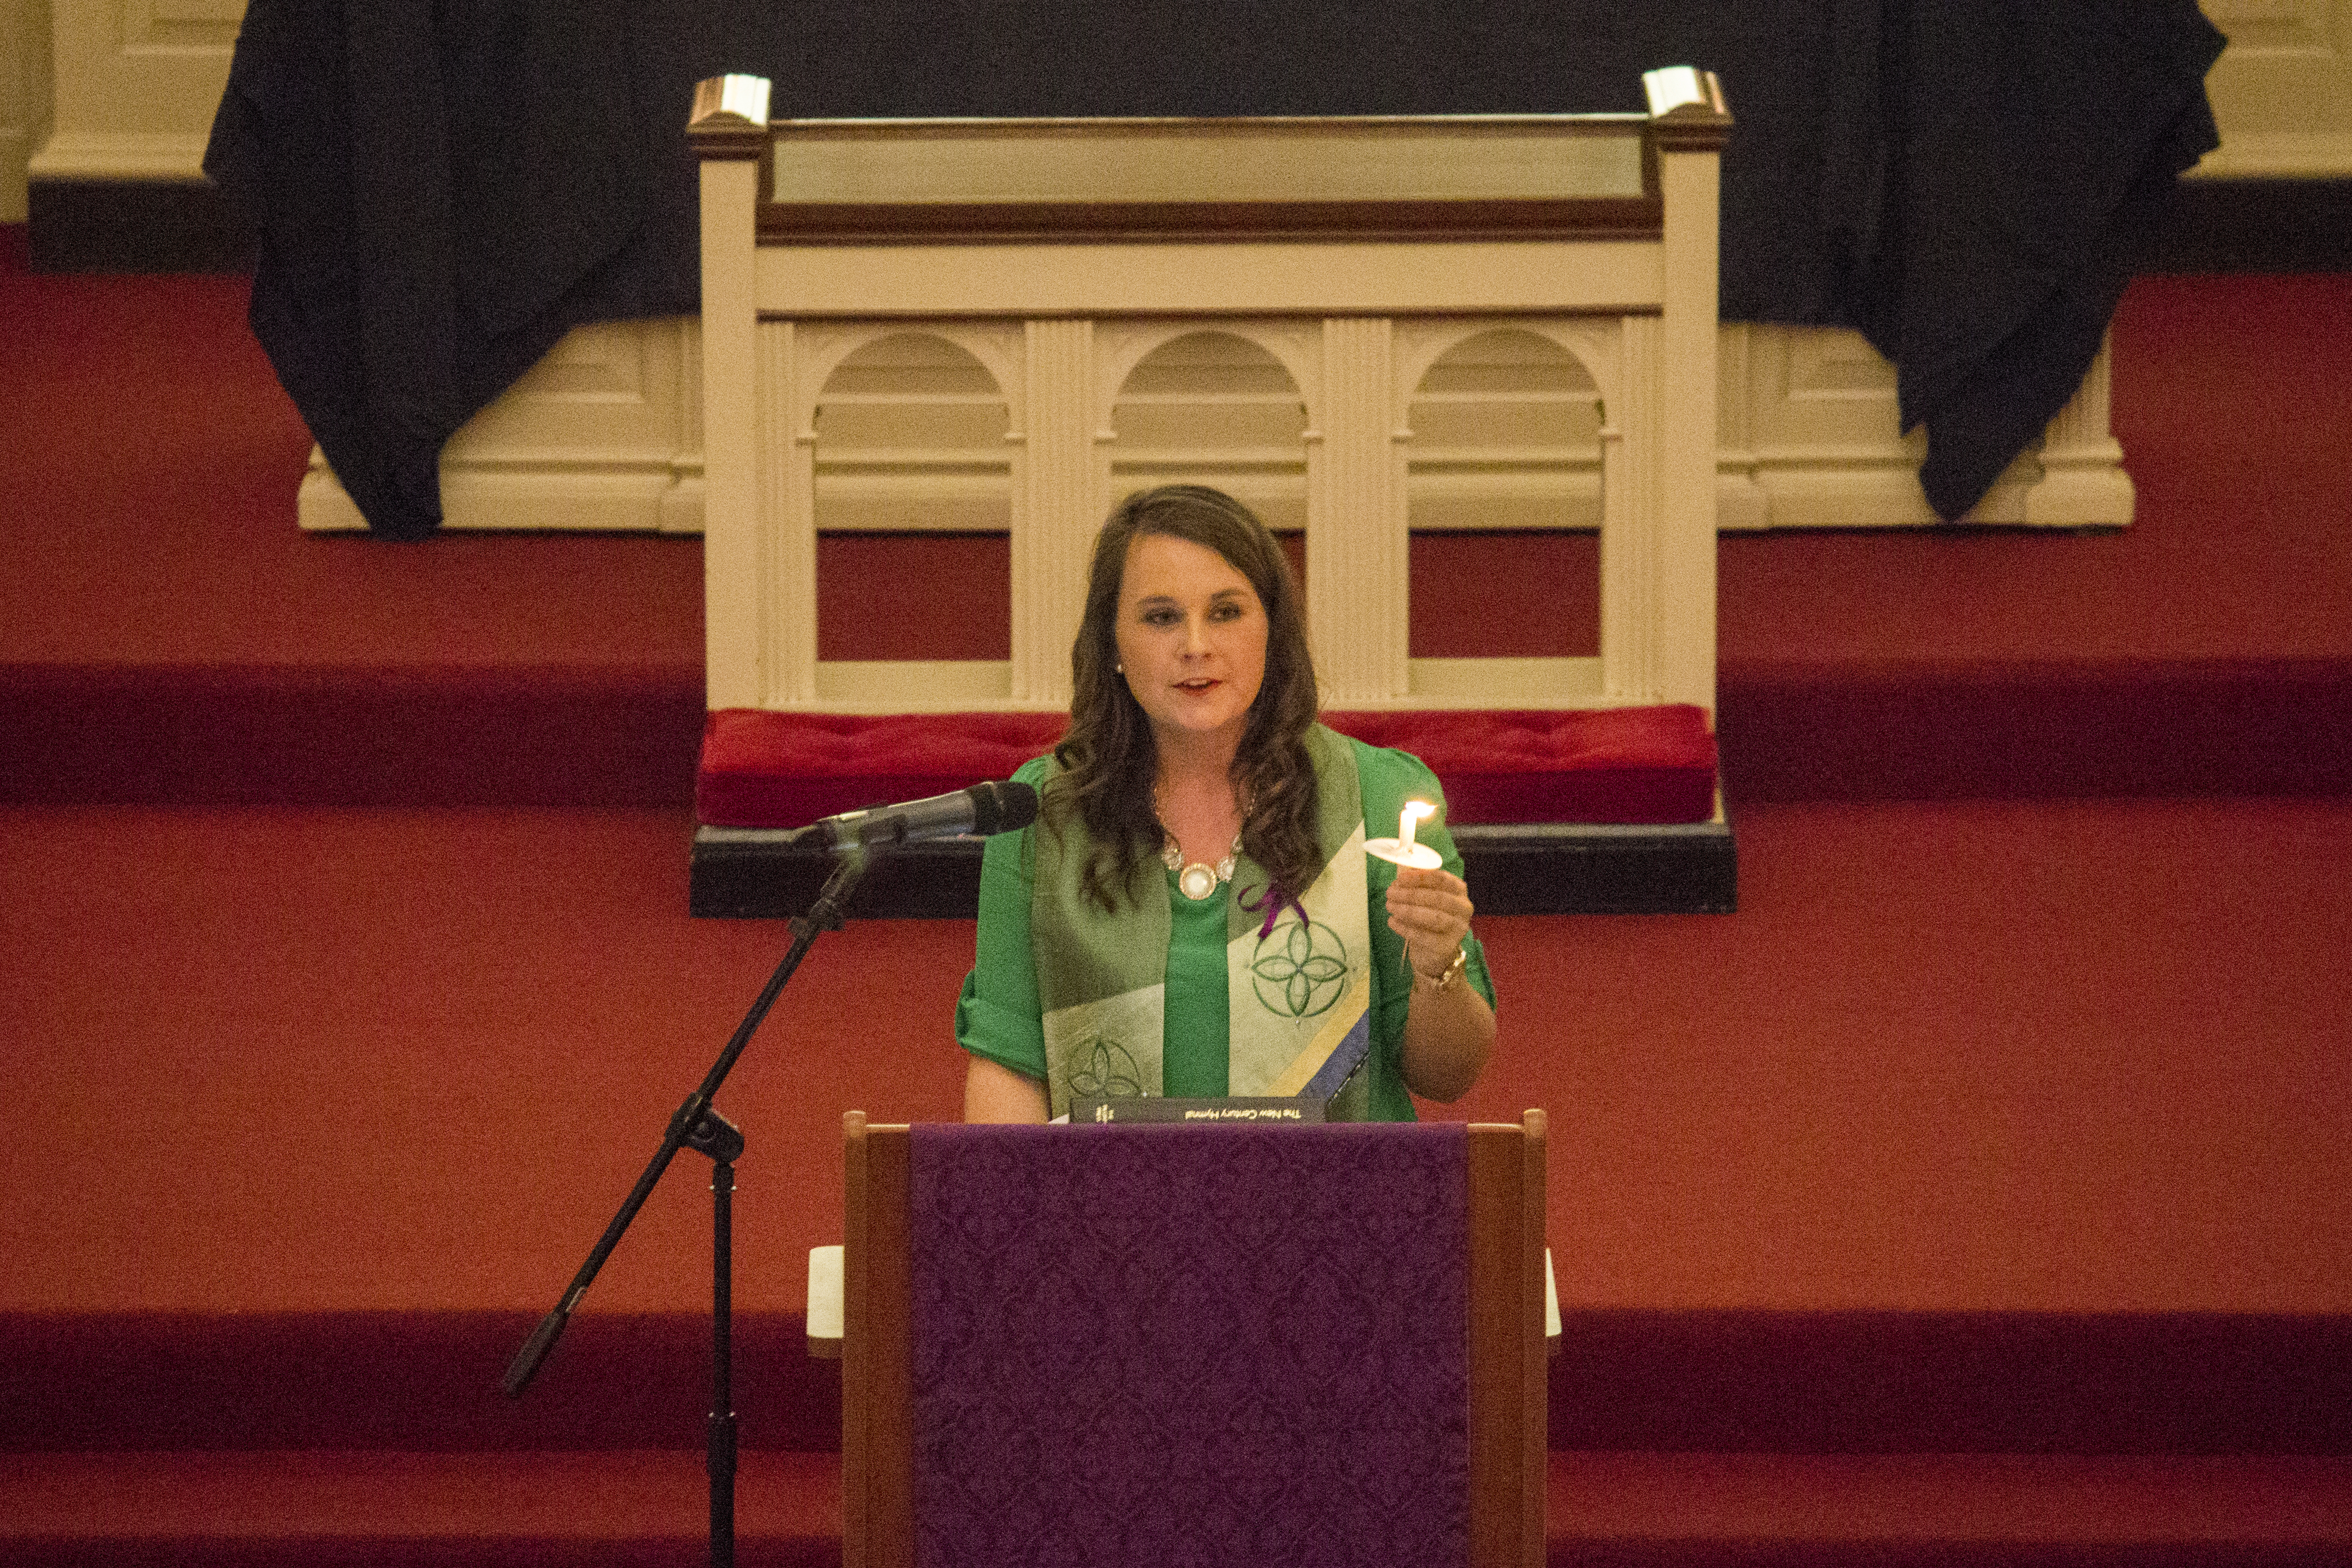 TCU and Brite graduate student Erin Taylor offers words of hope and encouragement for Nina Pham and all who struggle with illness. Photo courtesy of Kaitlyn Beckert and TCU 360.